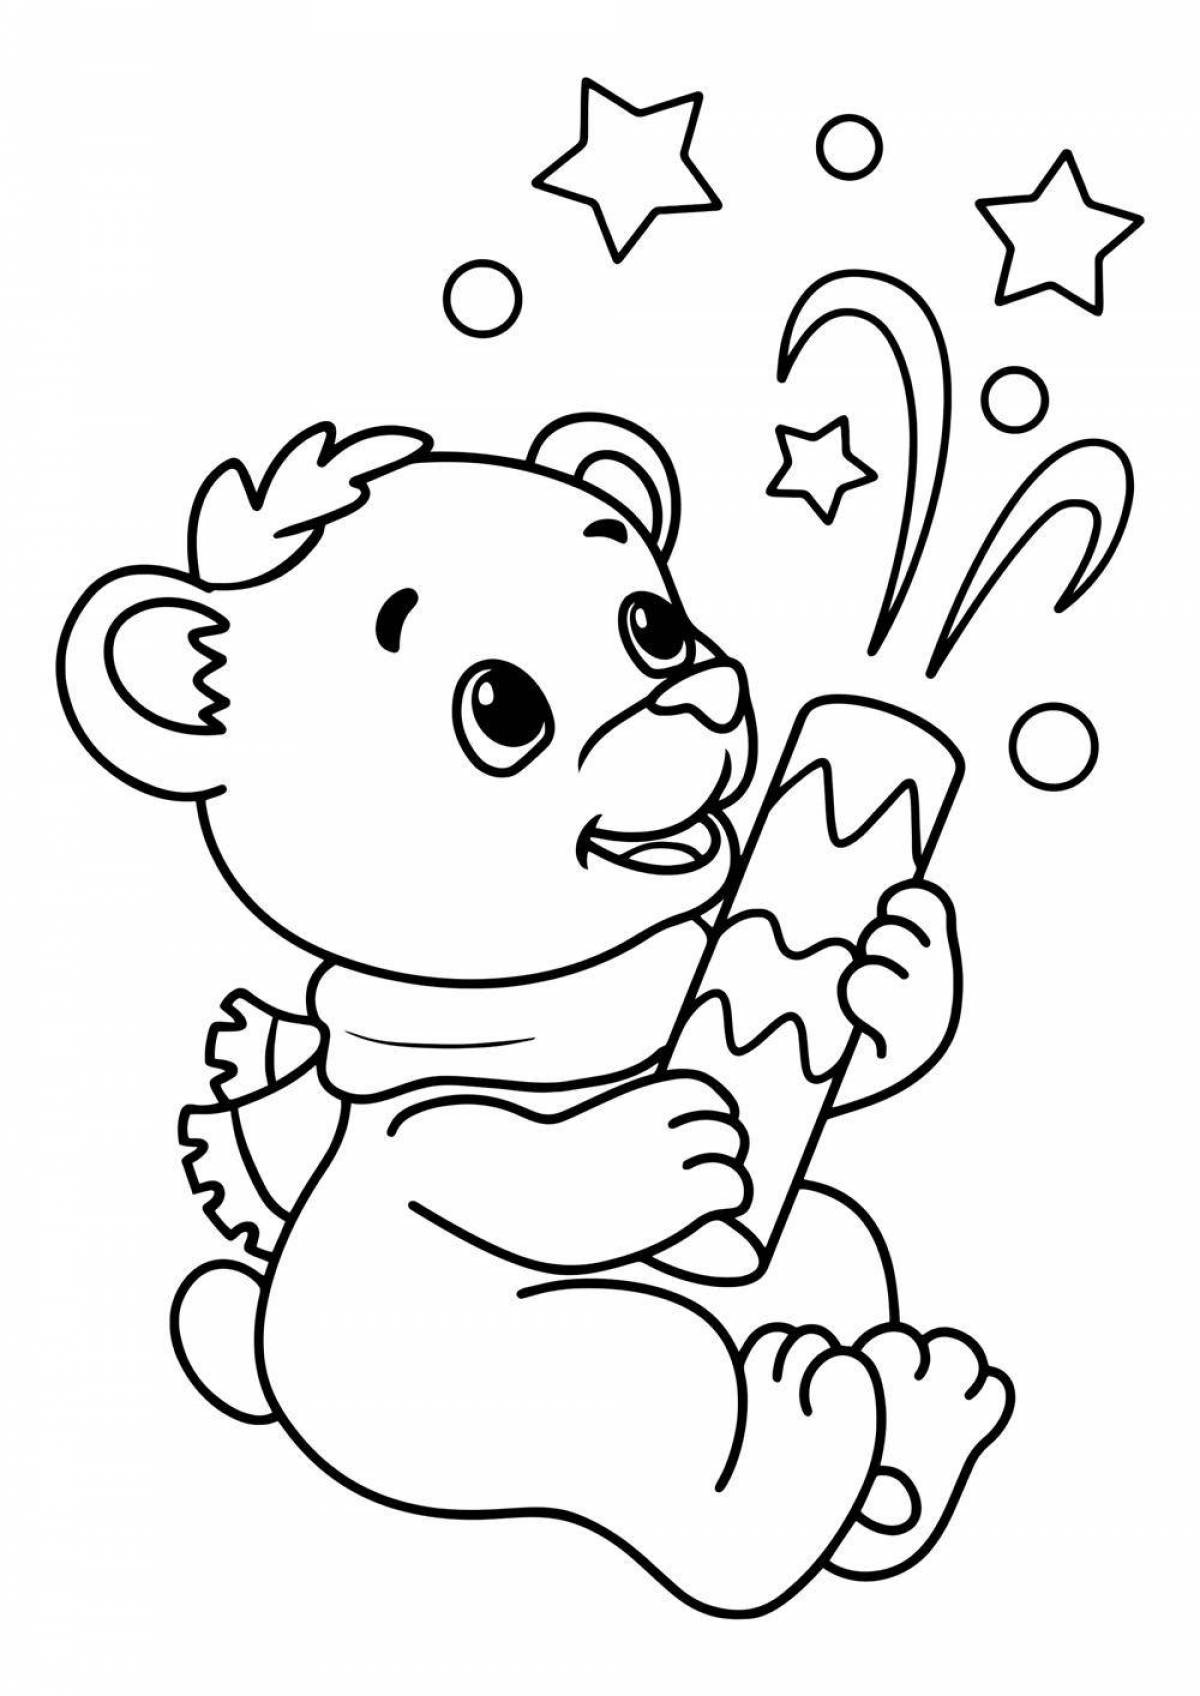 Adorable Christmas cracker coloring page